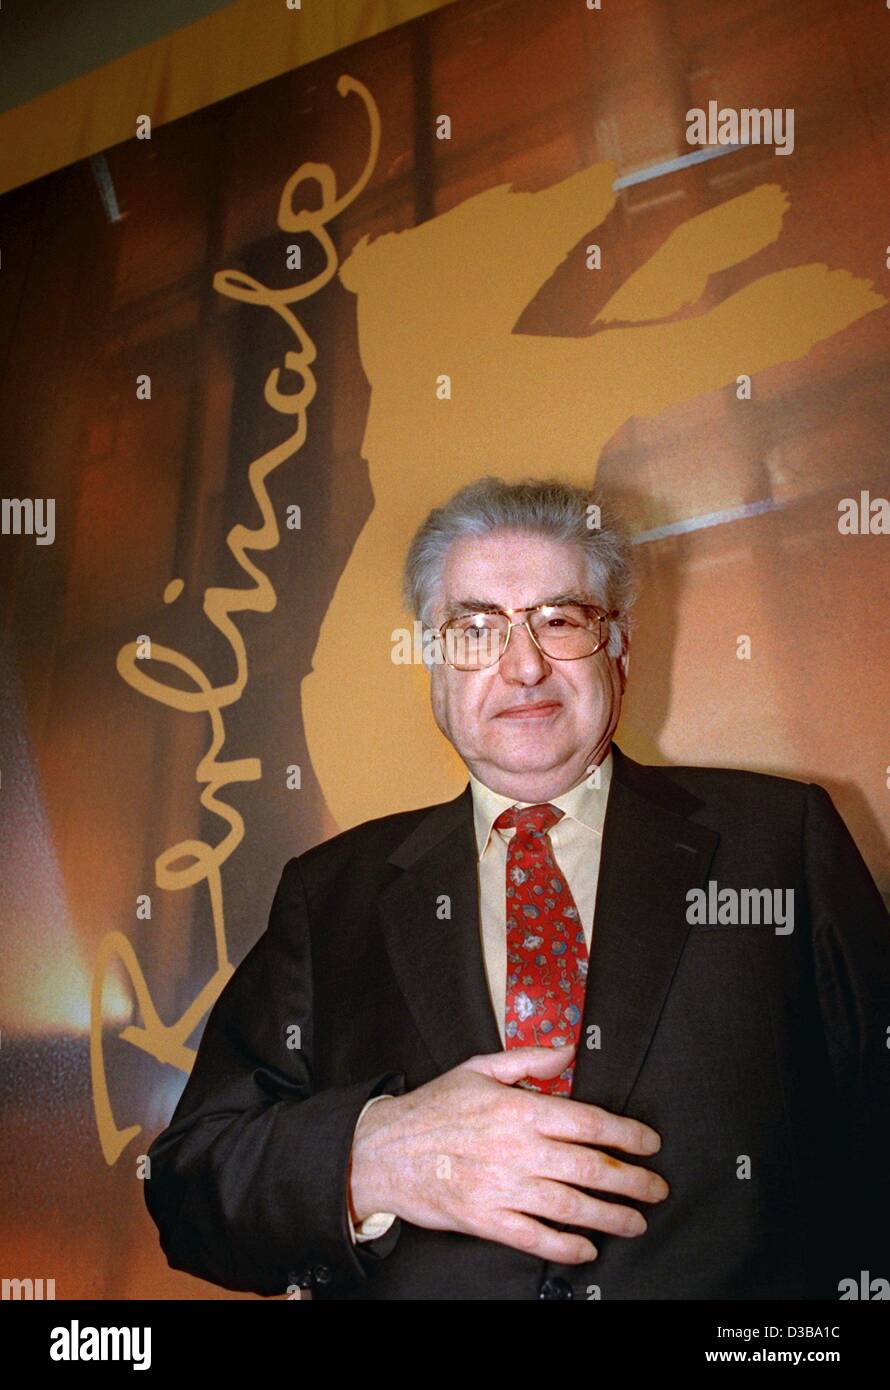 (dpa files) - Moritz de Hadeln, then Director of the International Film Festival, poses in front of a Berlinale poster during a press conference in Berlin, 1 February 2000. Born in 1940 in Exeter, England, Moritz de Hadeln was brought up in Italy, France and Switzerland, of which he is a citizen sin Stock Photo